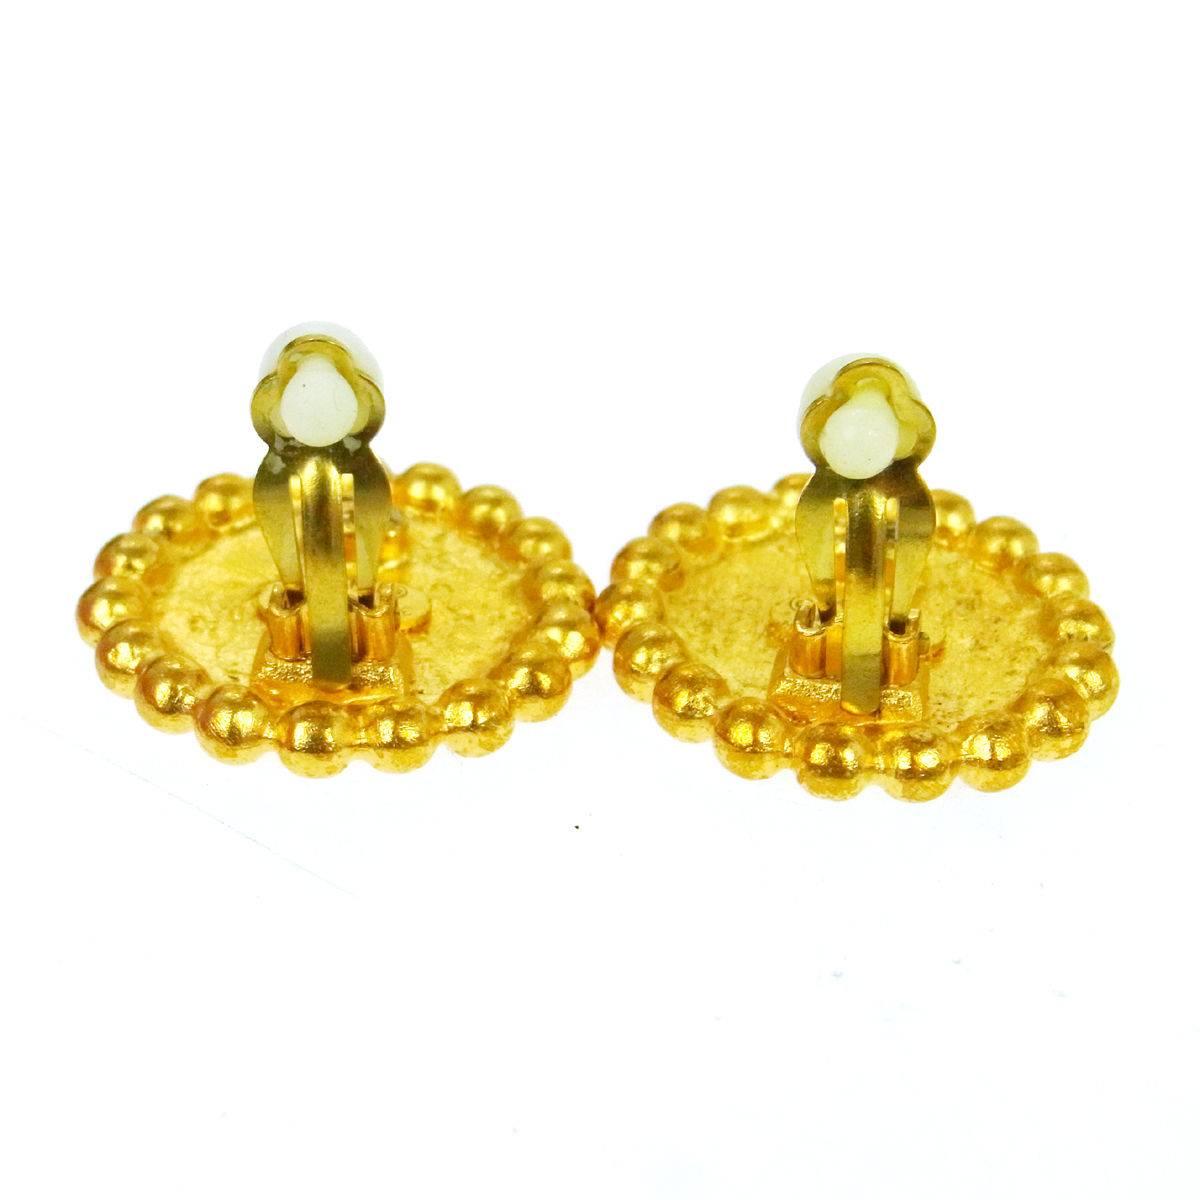 Chanel Gold Textured Round Black Charm Stud Evening Earrings 

Metal
Gold tone
Clip on closure
Made in France
Diameter 1"